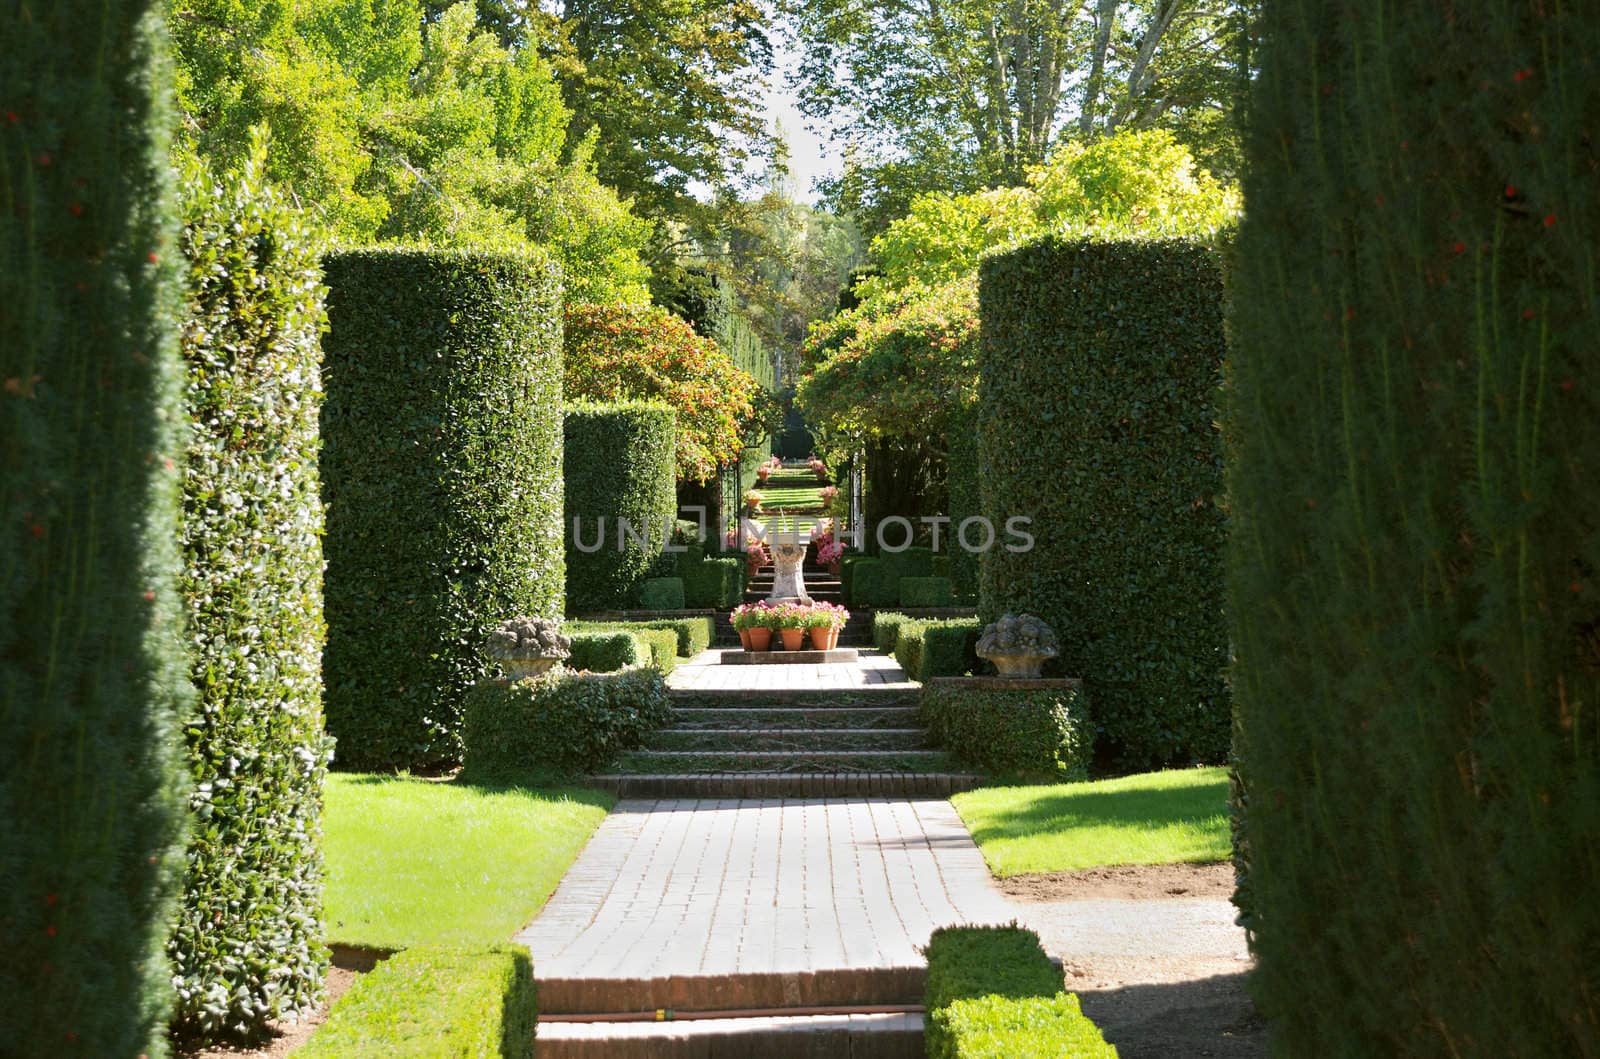 a view on a formal garden on a sunny day